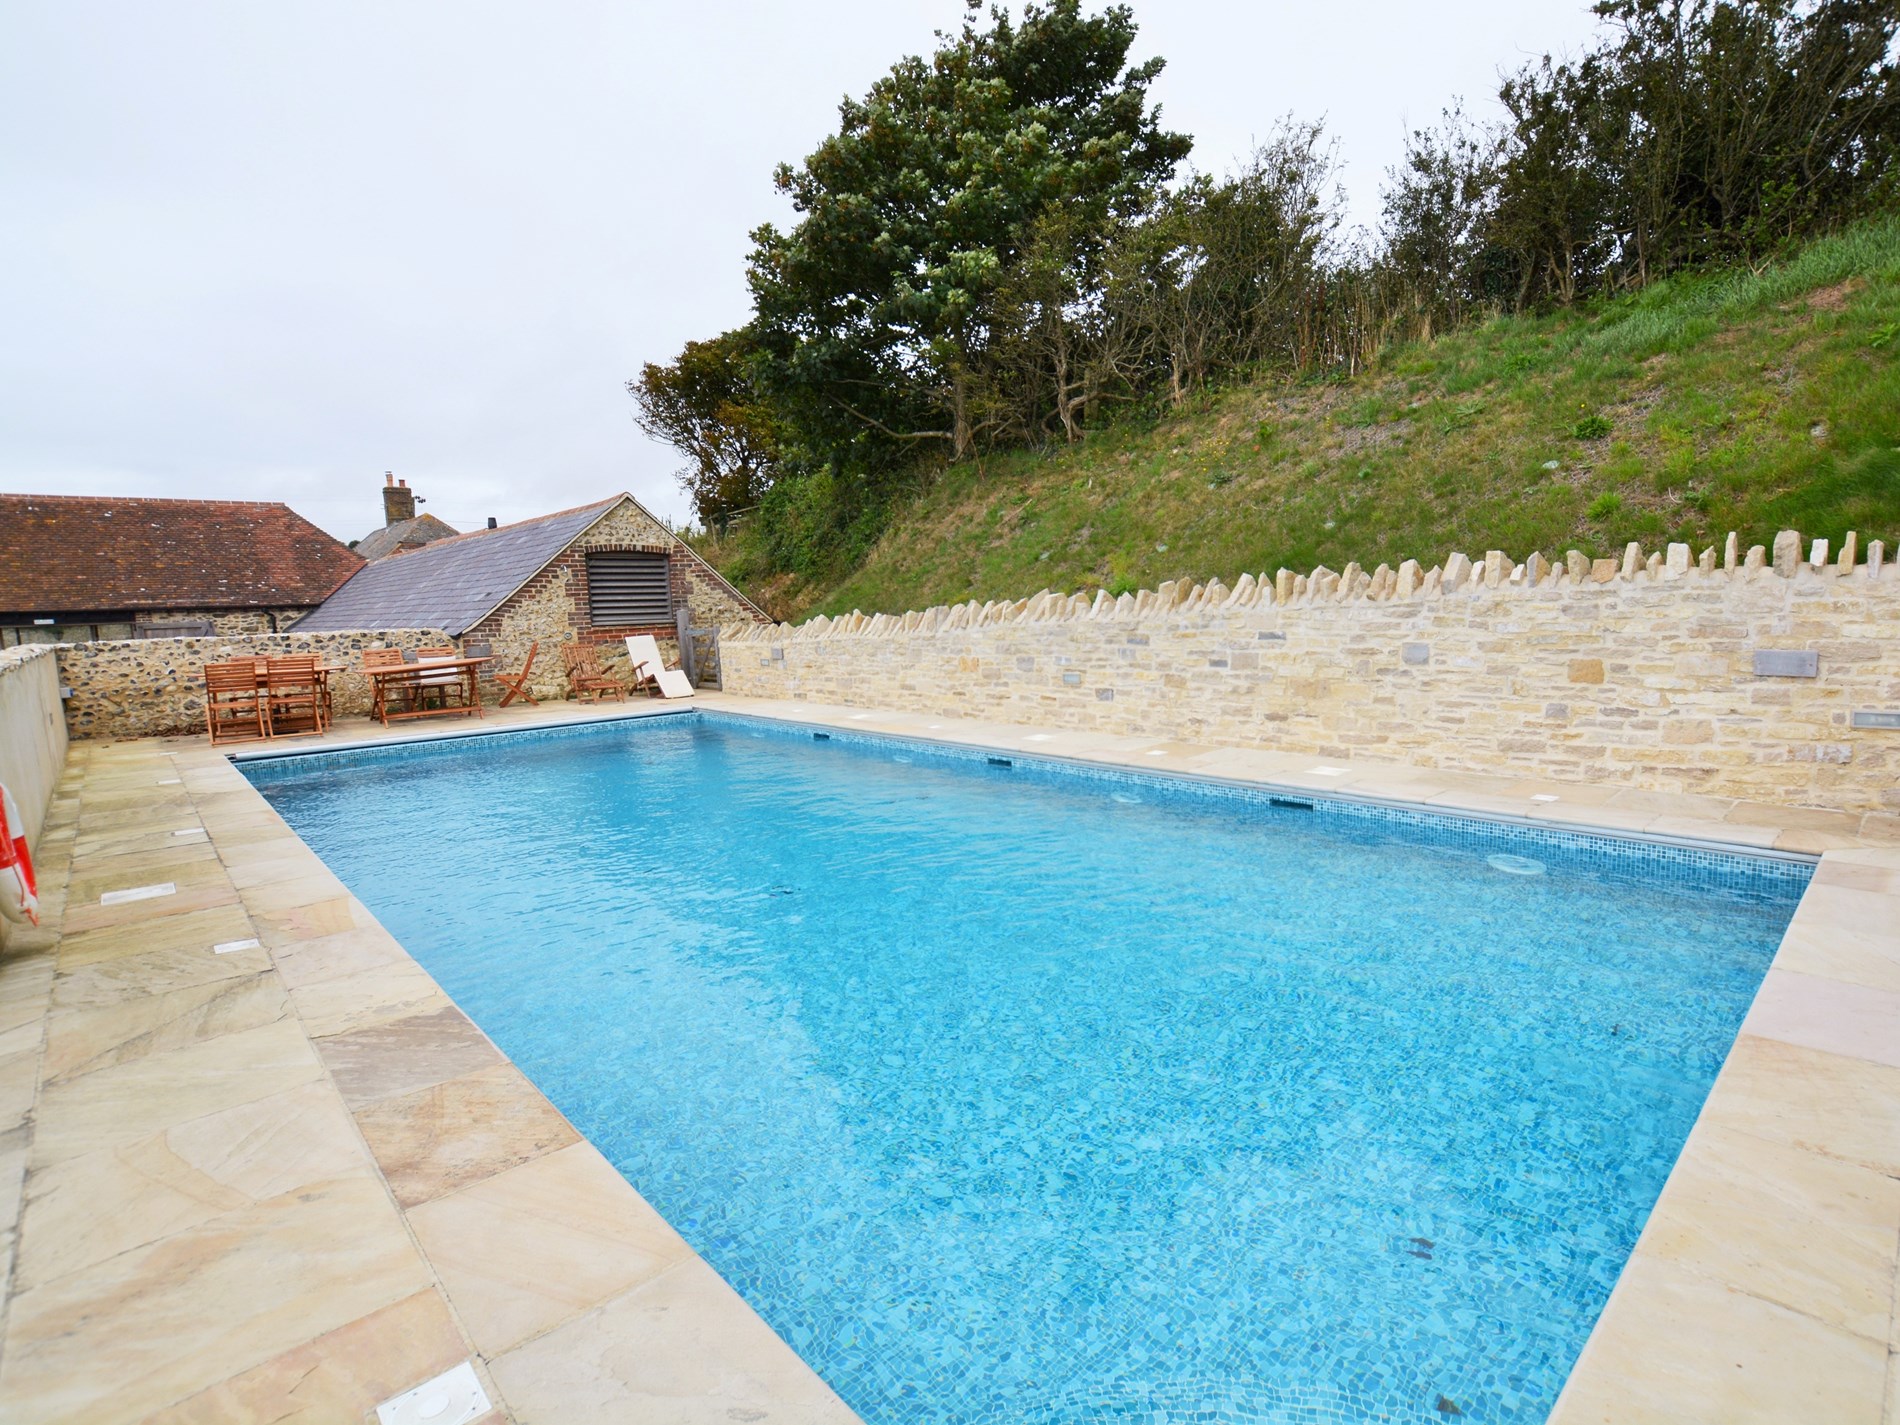 Luxury Romantic West Lulworth Barn A Holiday Cottage In Dorset